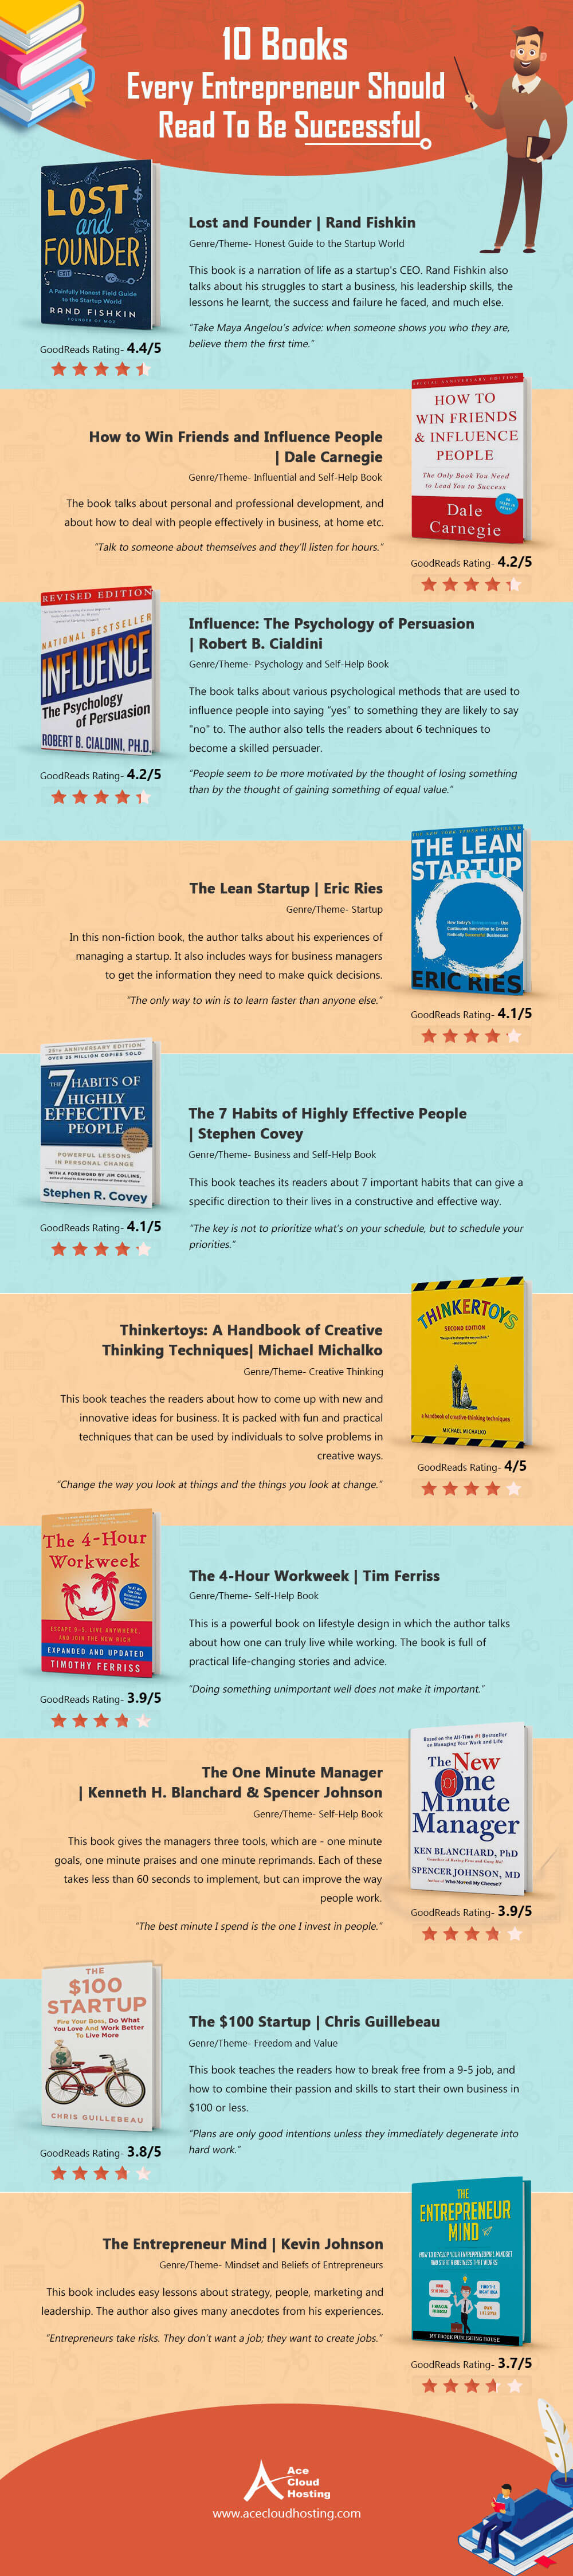 Books on becoming a successful businessman